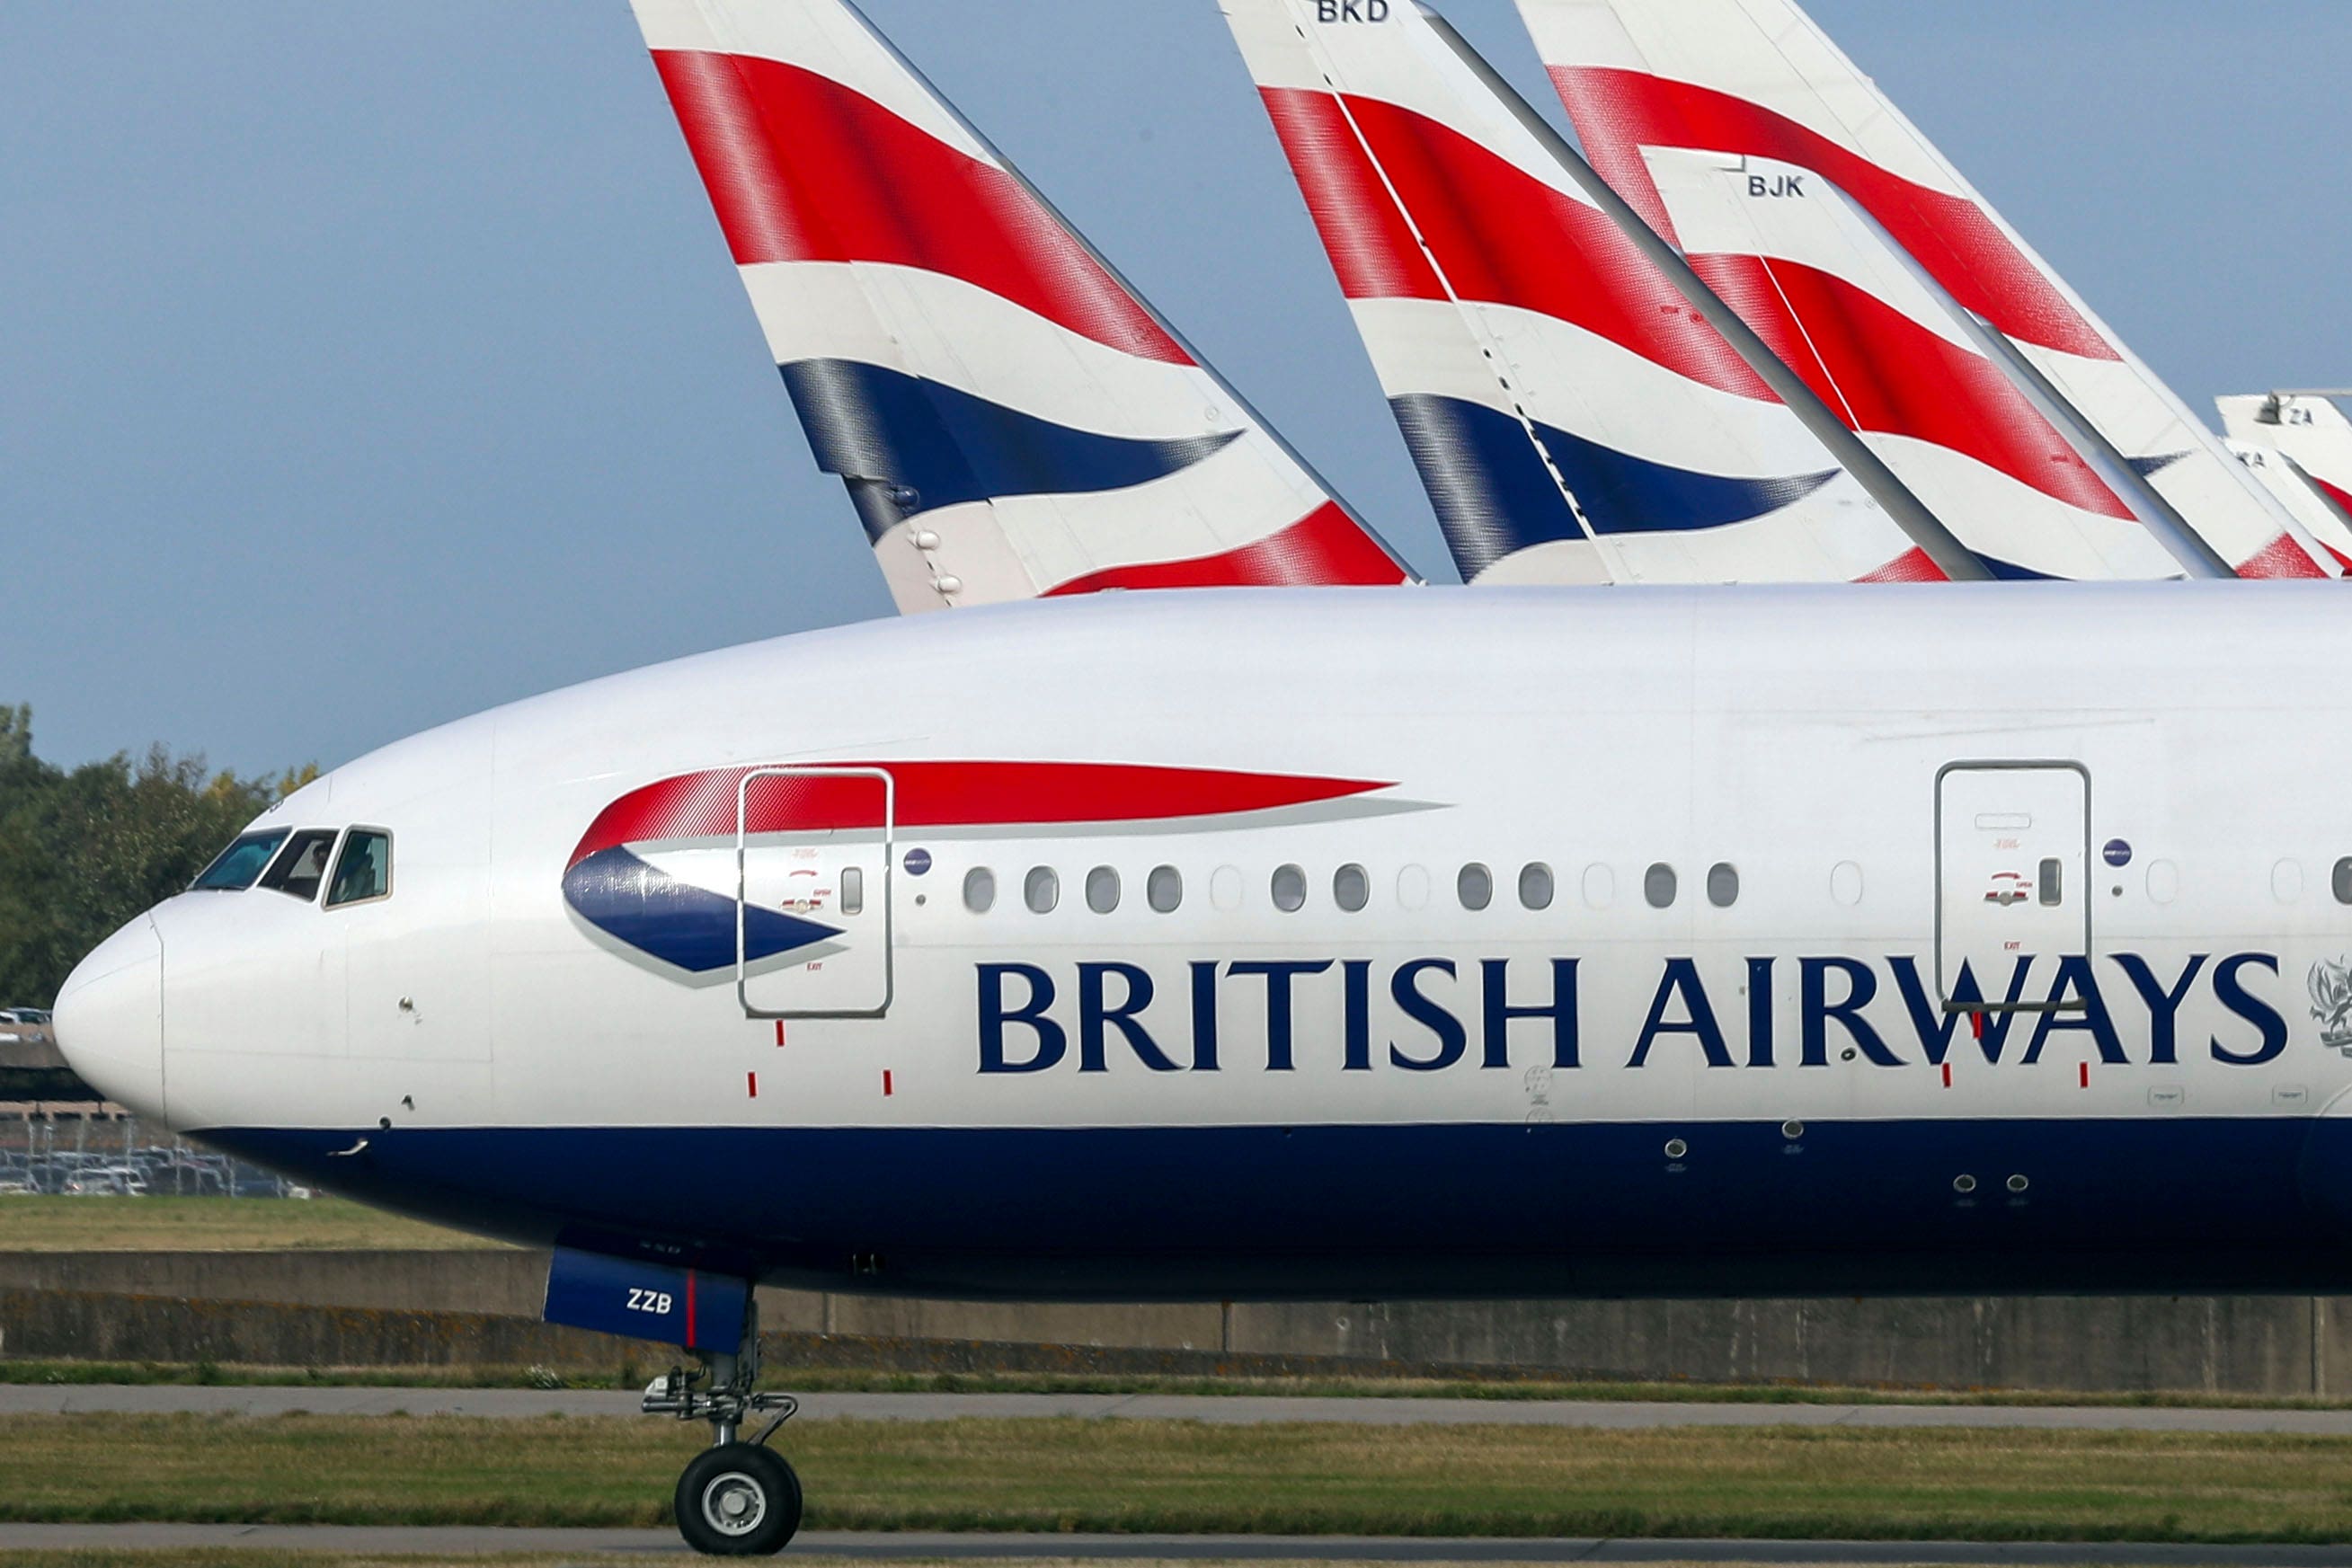 British Airways owner IAG has returned to profit as the airline industry continues to rebound from Covid-19 (Steve Parsons/PA)